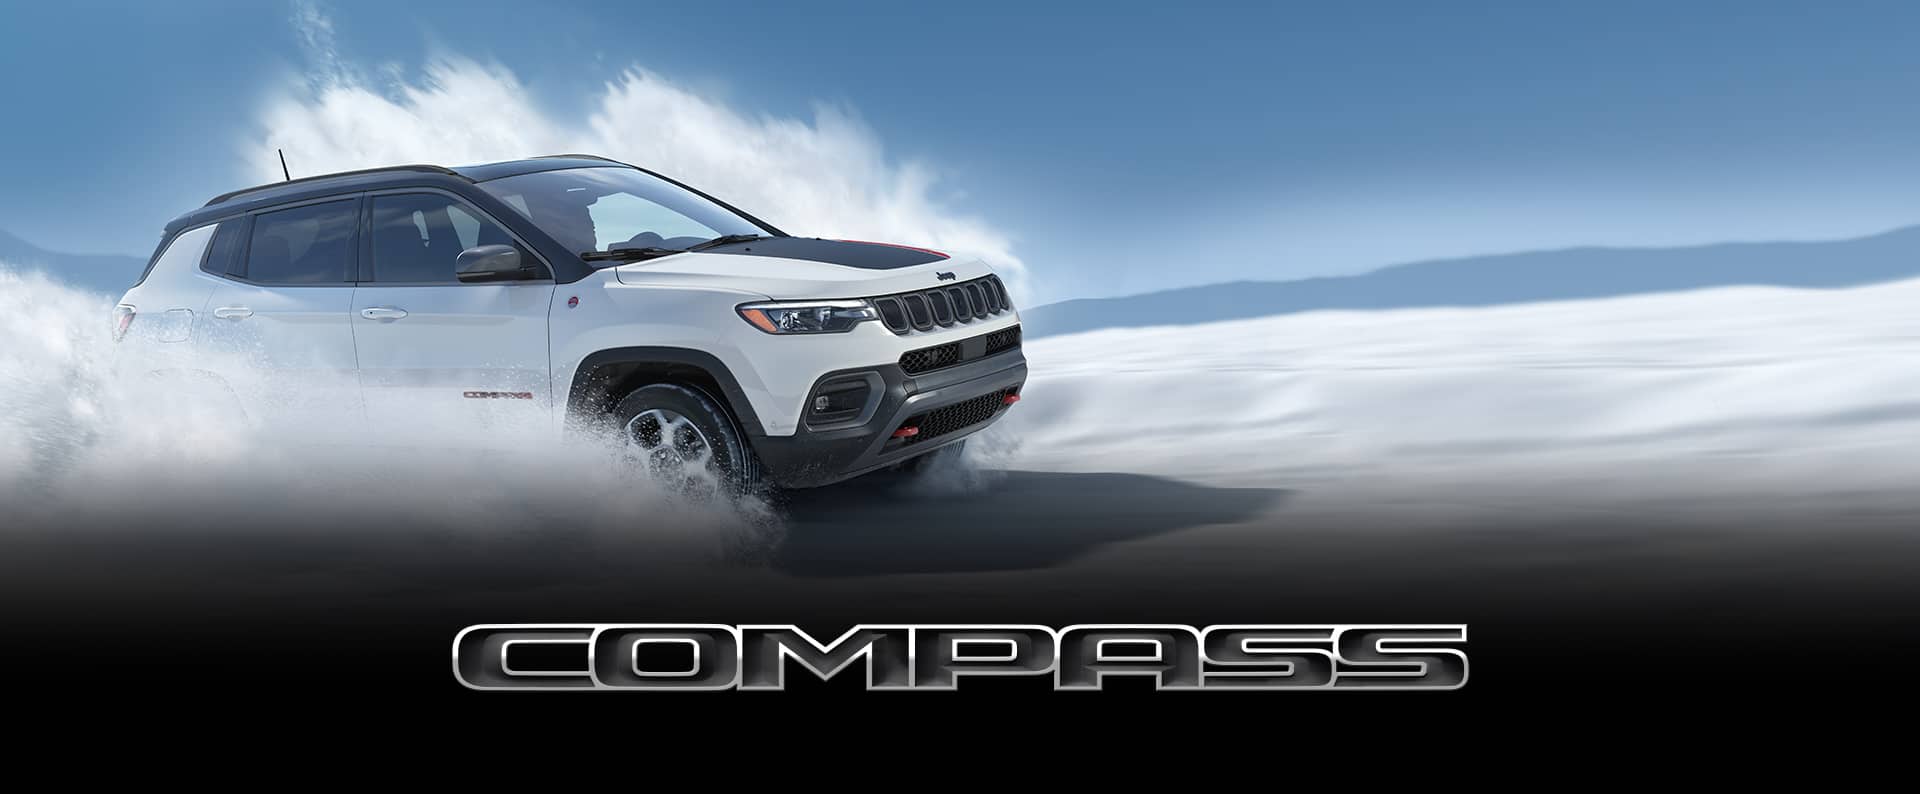 The 2022 Jeep Compass Trailhawk being driven at speed off-road in snow, with clouds of snow obscuring its wheels.